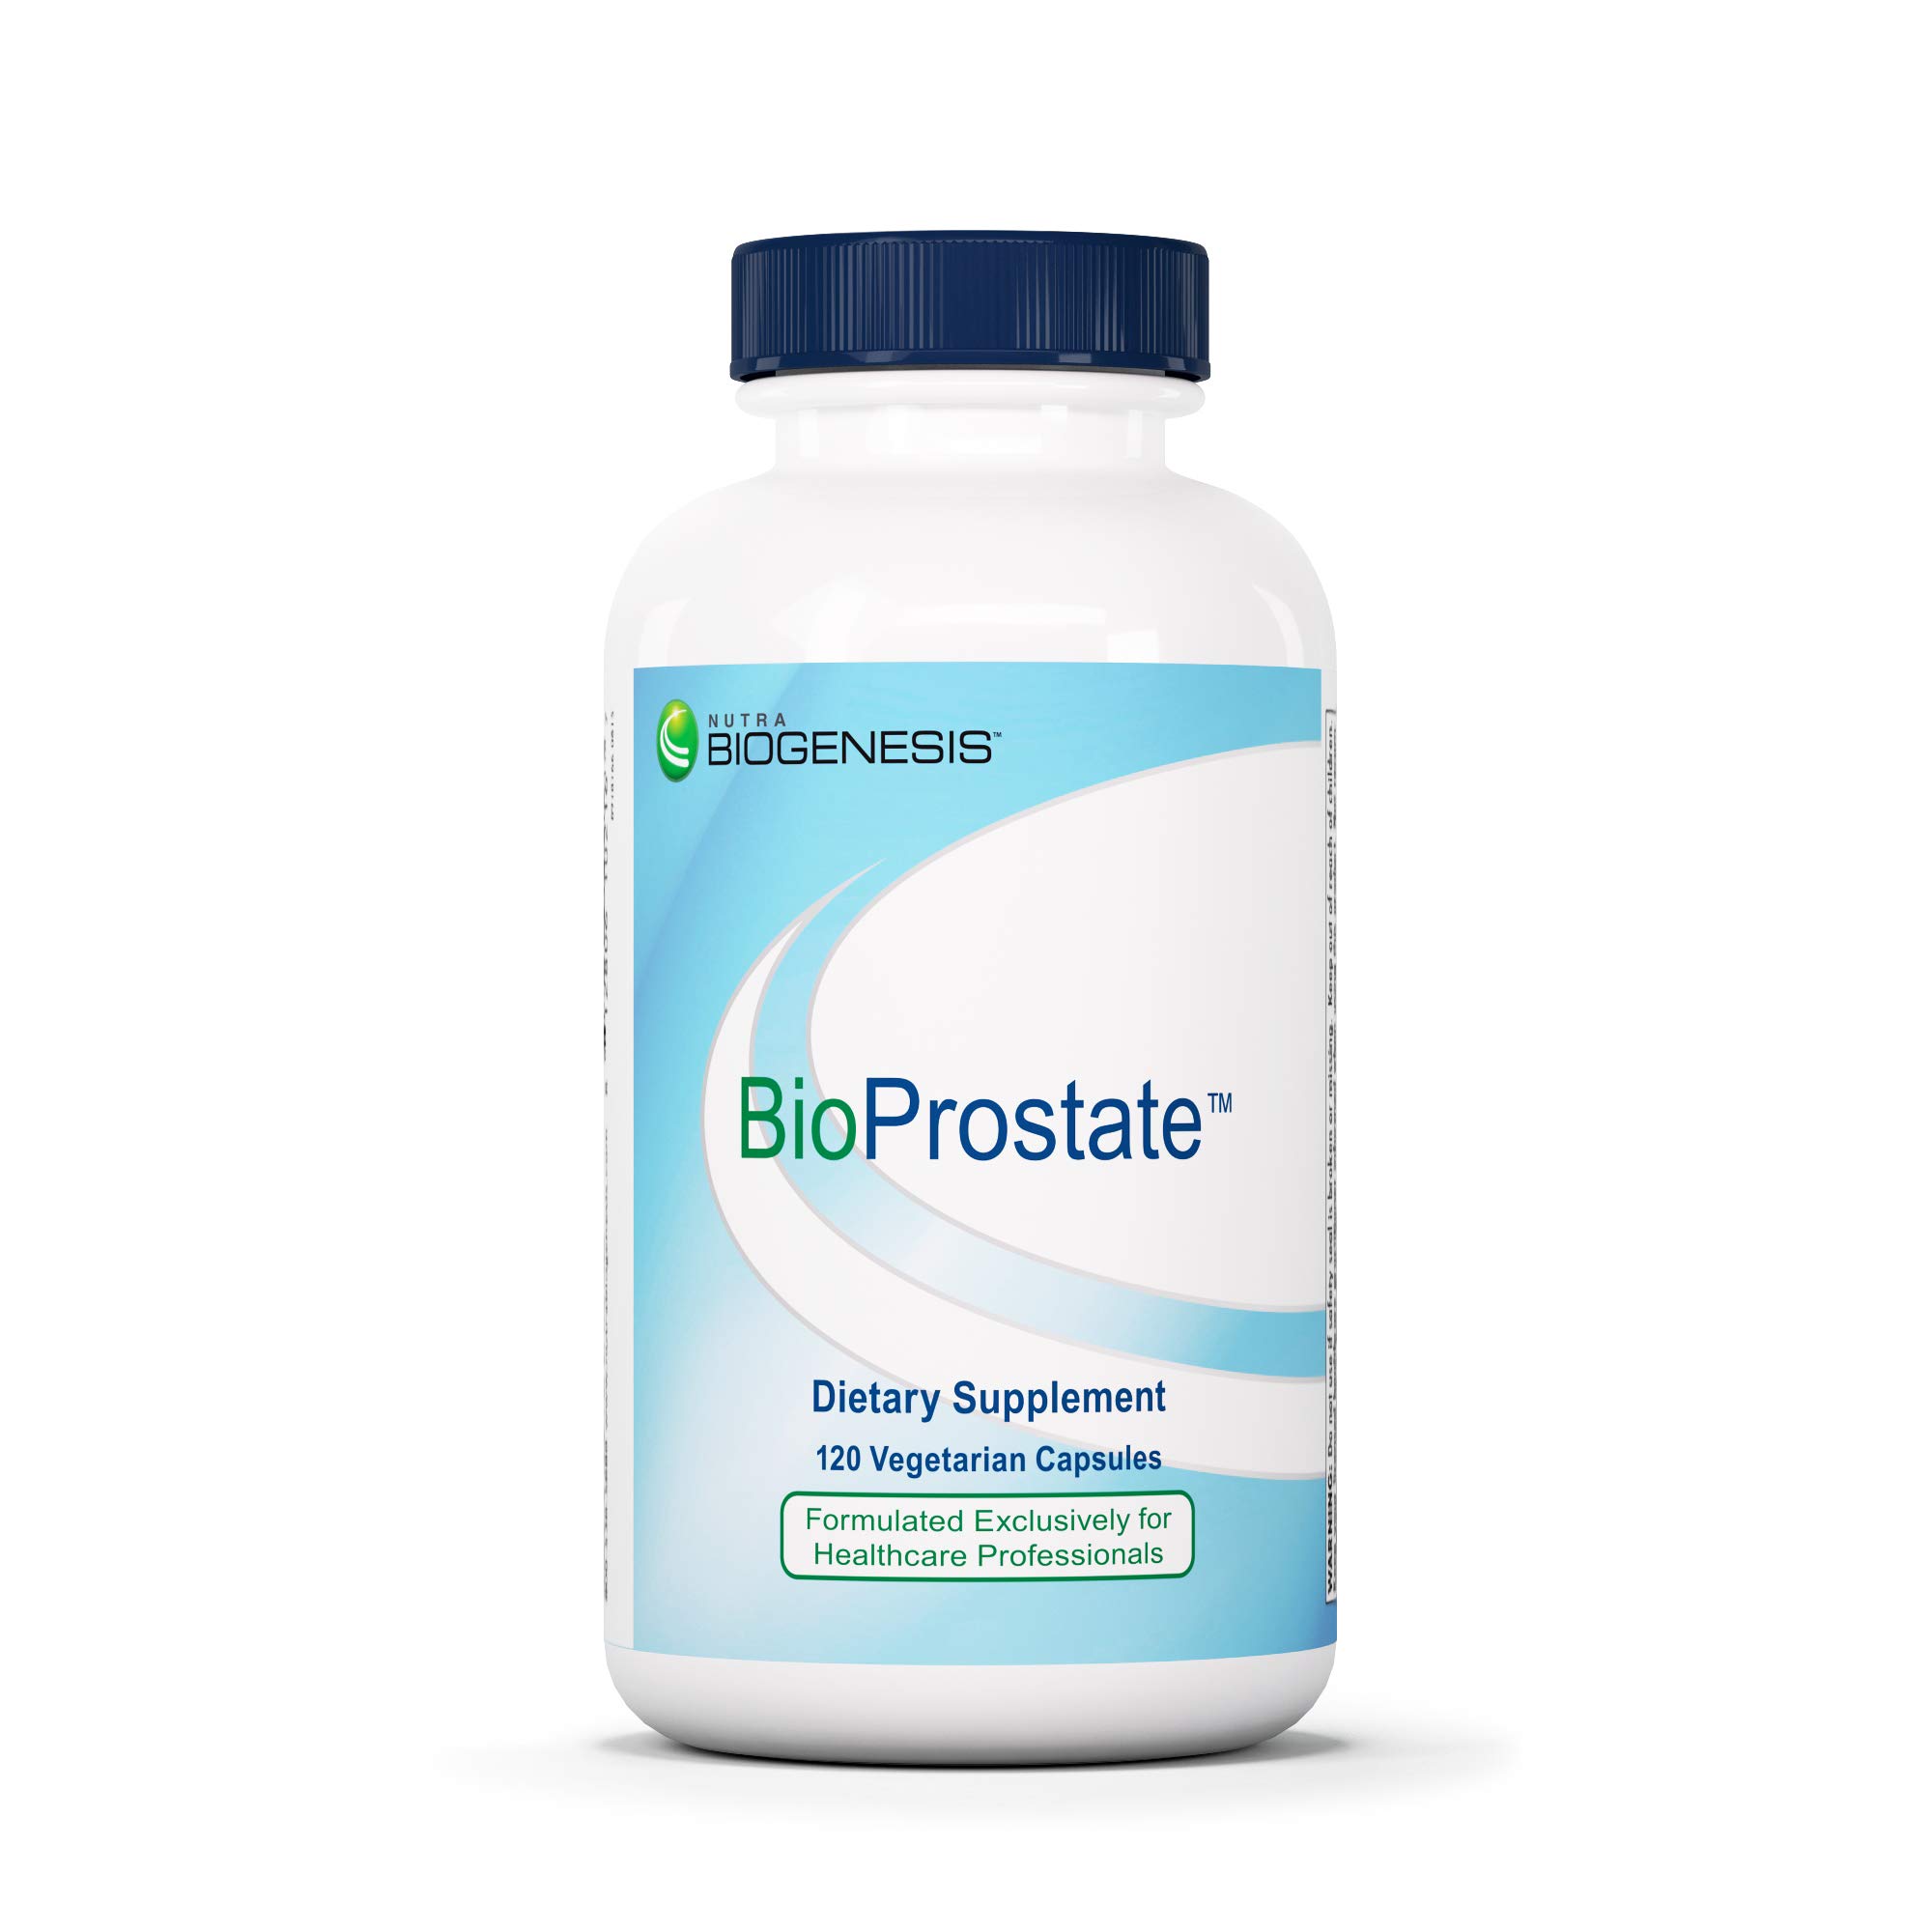 Nutra BioGenesis - BioProstate - Saw Palmetto, Beta-Sitosterol and Lycopene for Prostate Health and Urinary Tract Support - Gluten Free, Vegan - 12...